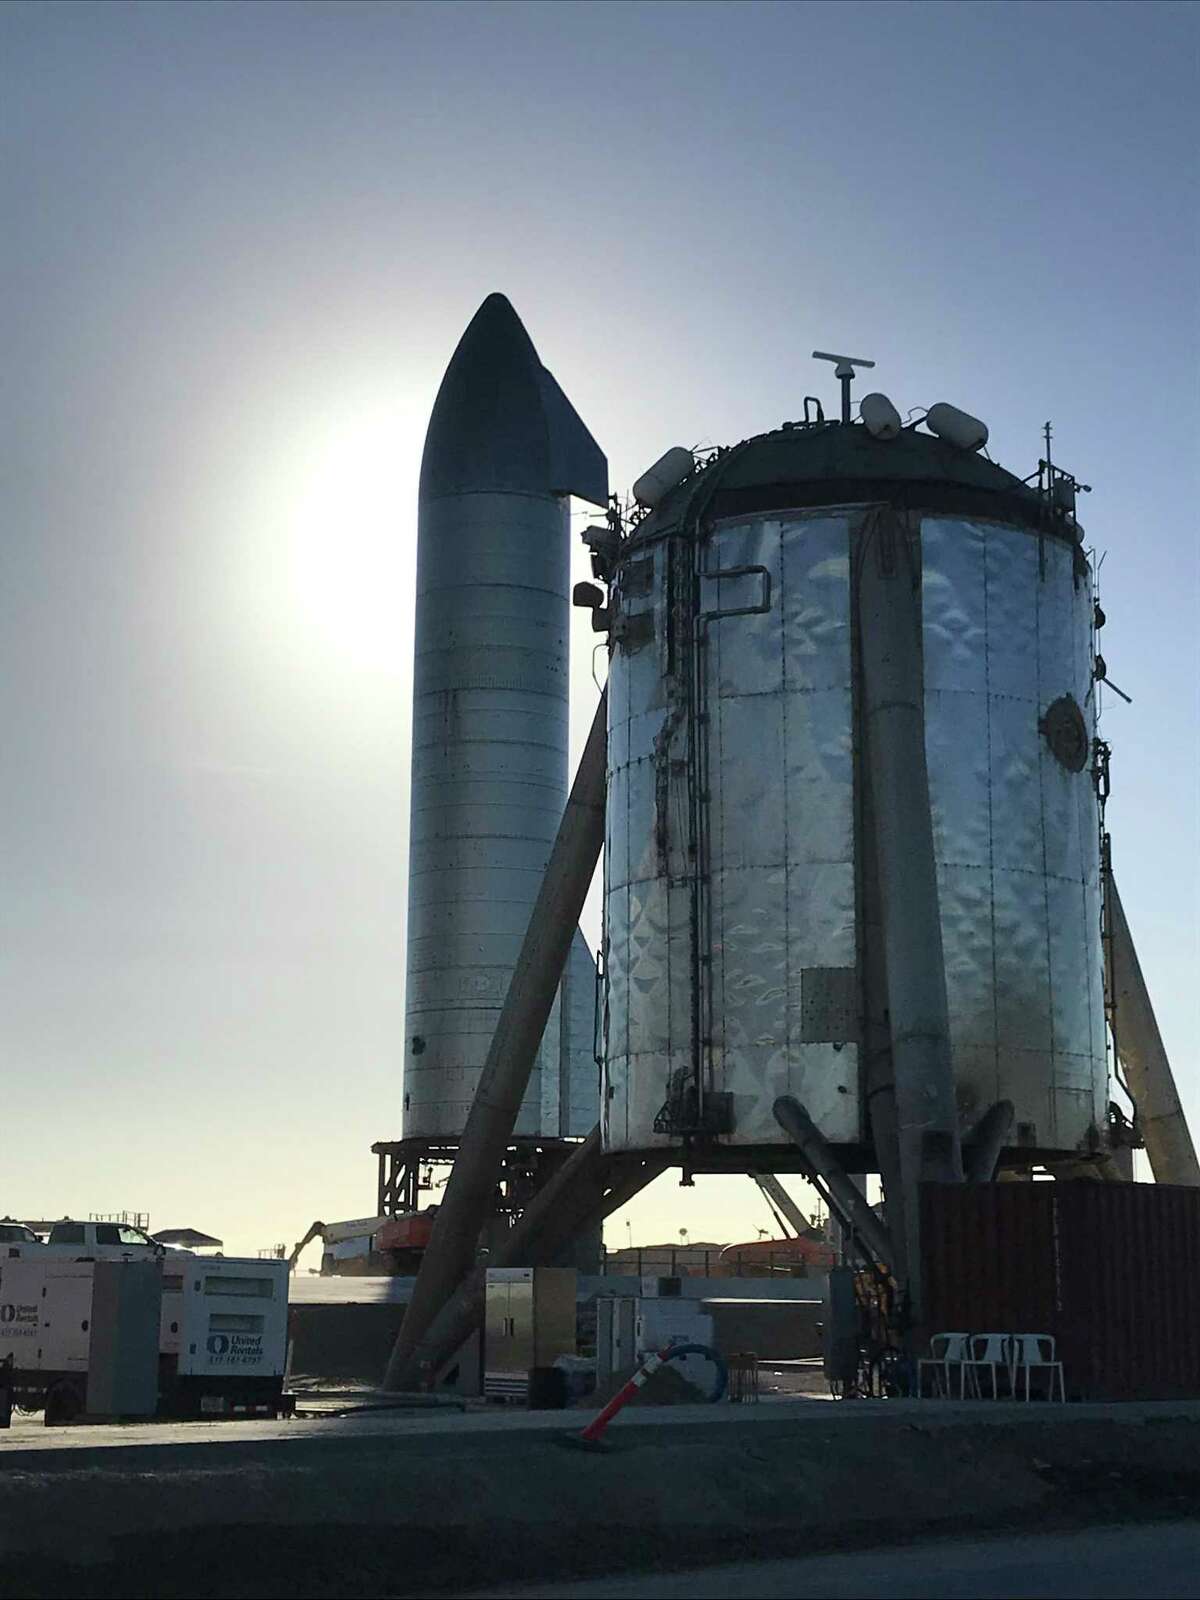 SpaceX's Starship, SN8, is set to launch to 15 kilometers, or roughly 50,000 feet, from the company's Boca Chica, Texas launch facility. CEO Elon Musk hopes the Starship will someday shepherd people to the moon, Mars and beyond. The 15 km flight is the most ambitious test of the vertically-landing spacecraft to date.